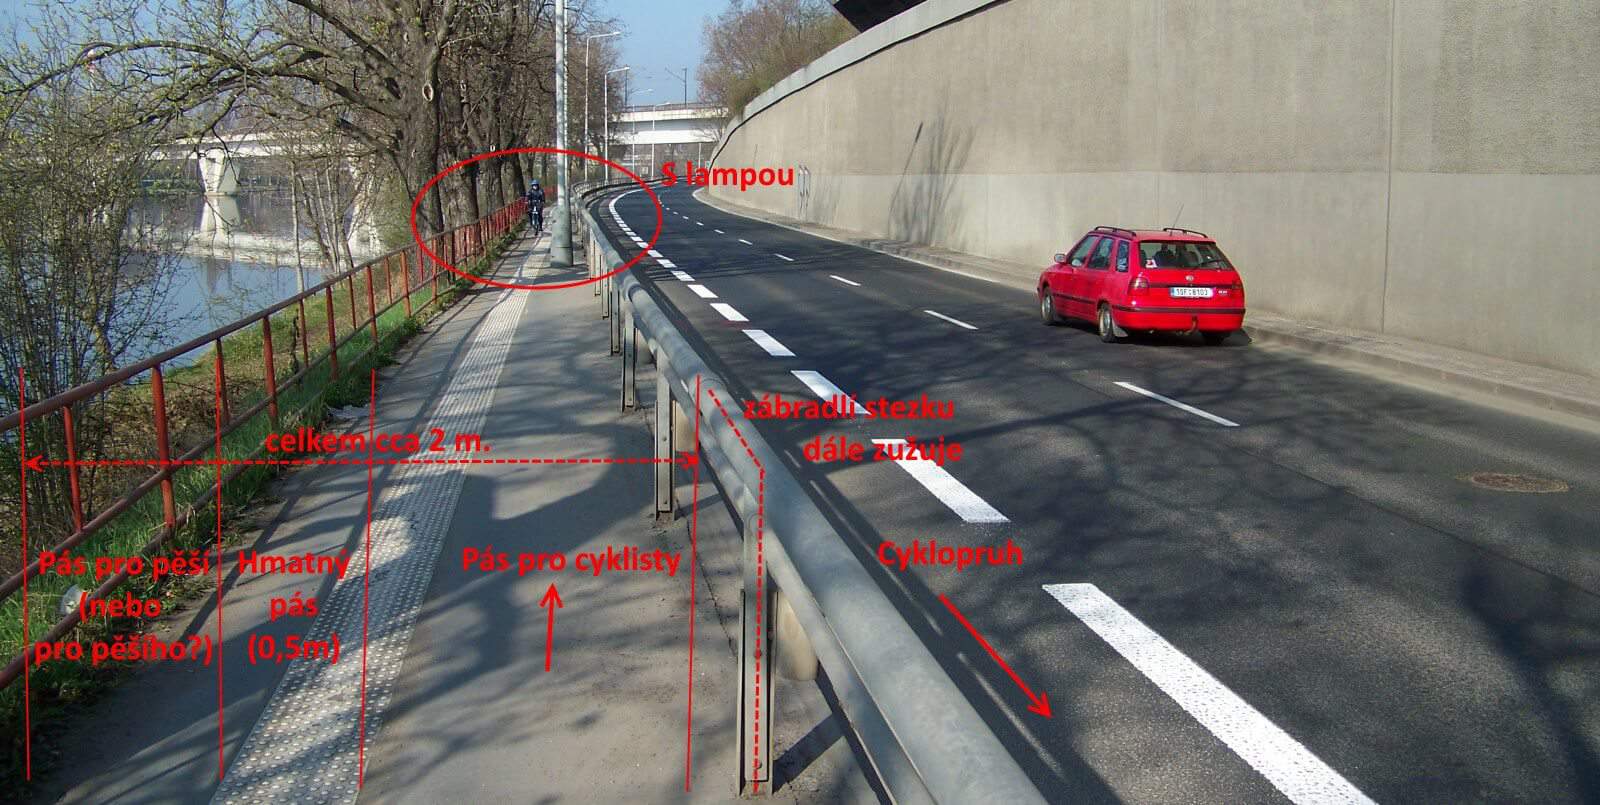 Partial improvements are planned for the path along Povltavská Street. After the completion of the city ring road, a truly high-quality route for the A2 cycle path will be created in that area. Zdroj: Městem na kole